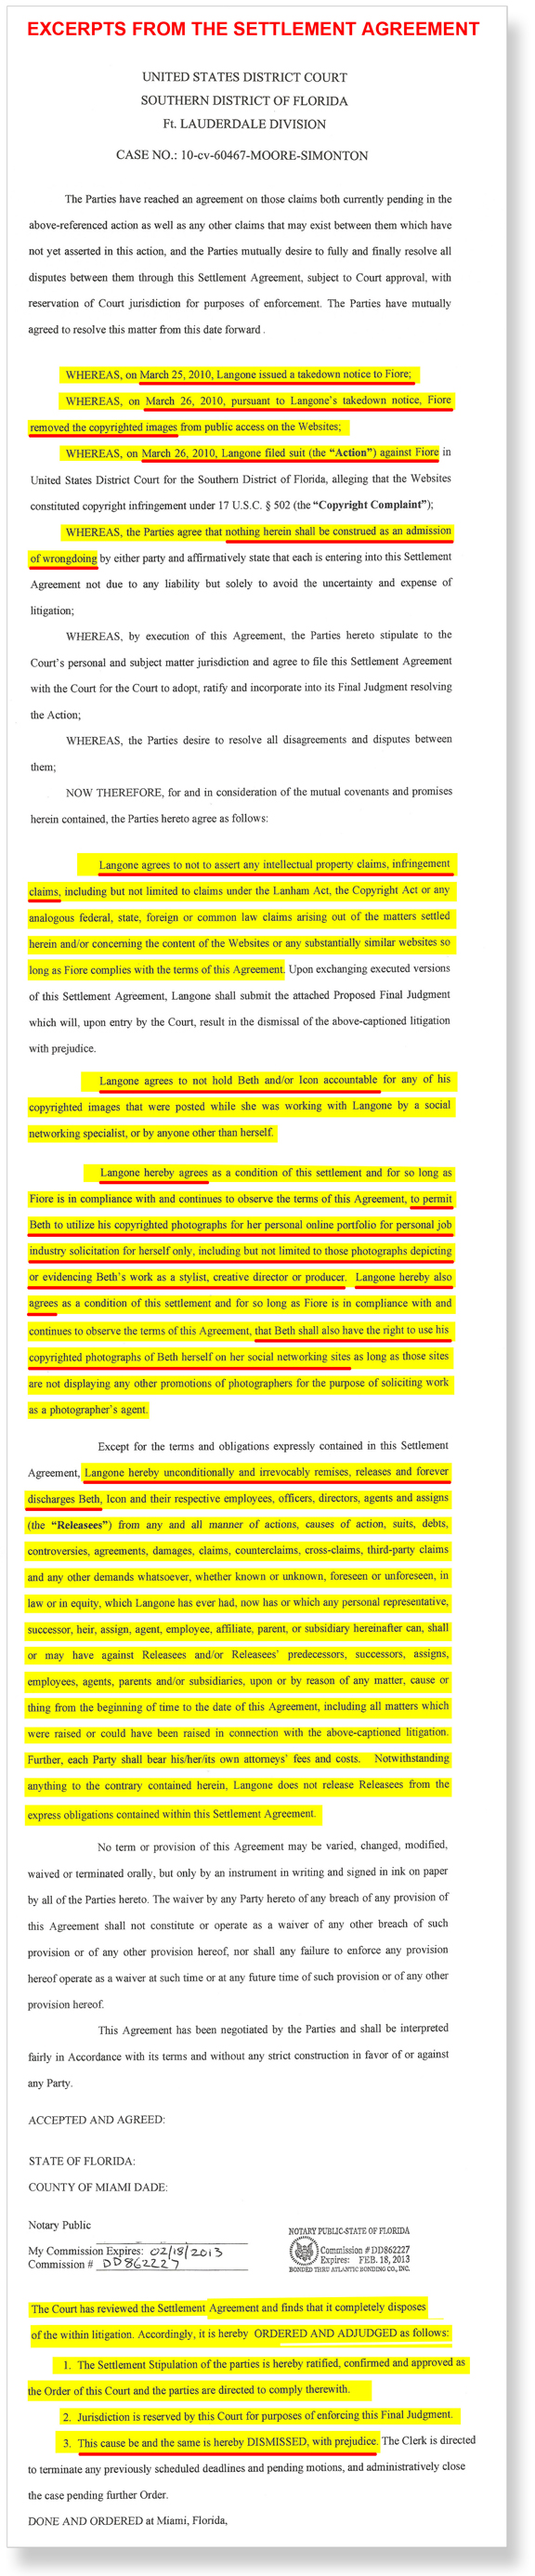 Excerpts from Lawsuit Settlement Agreement